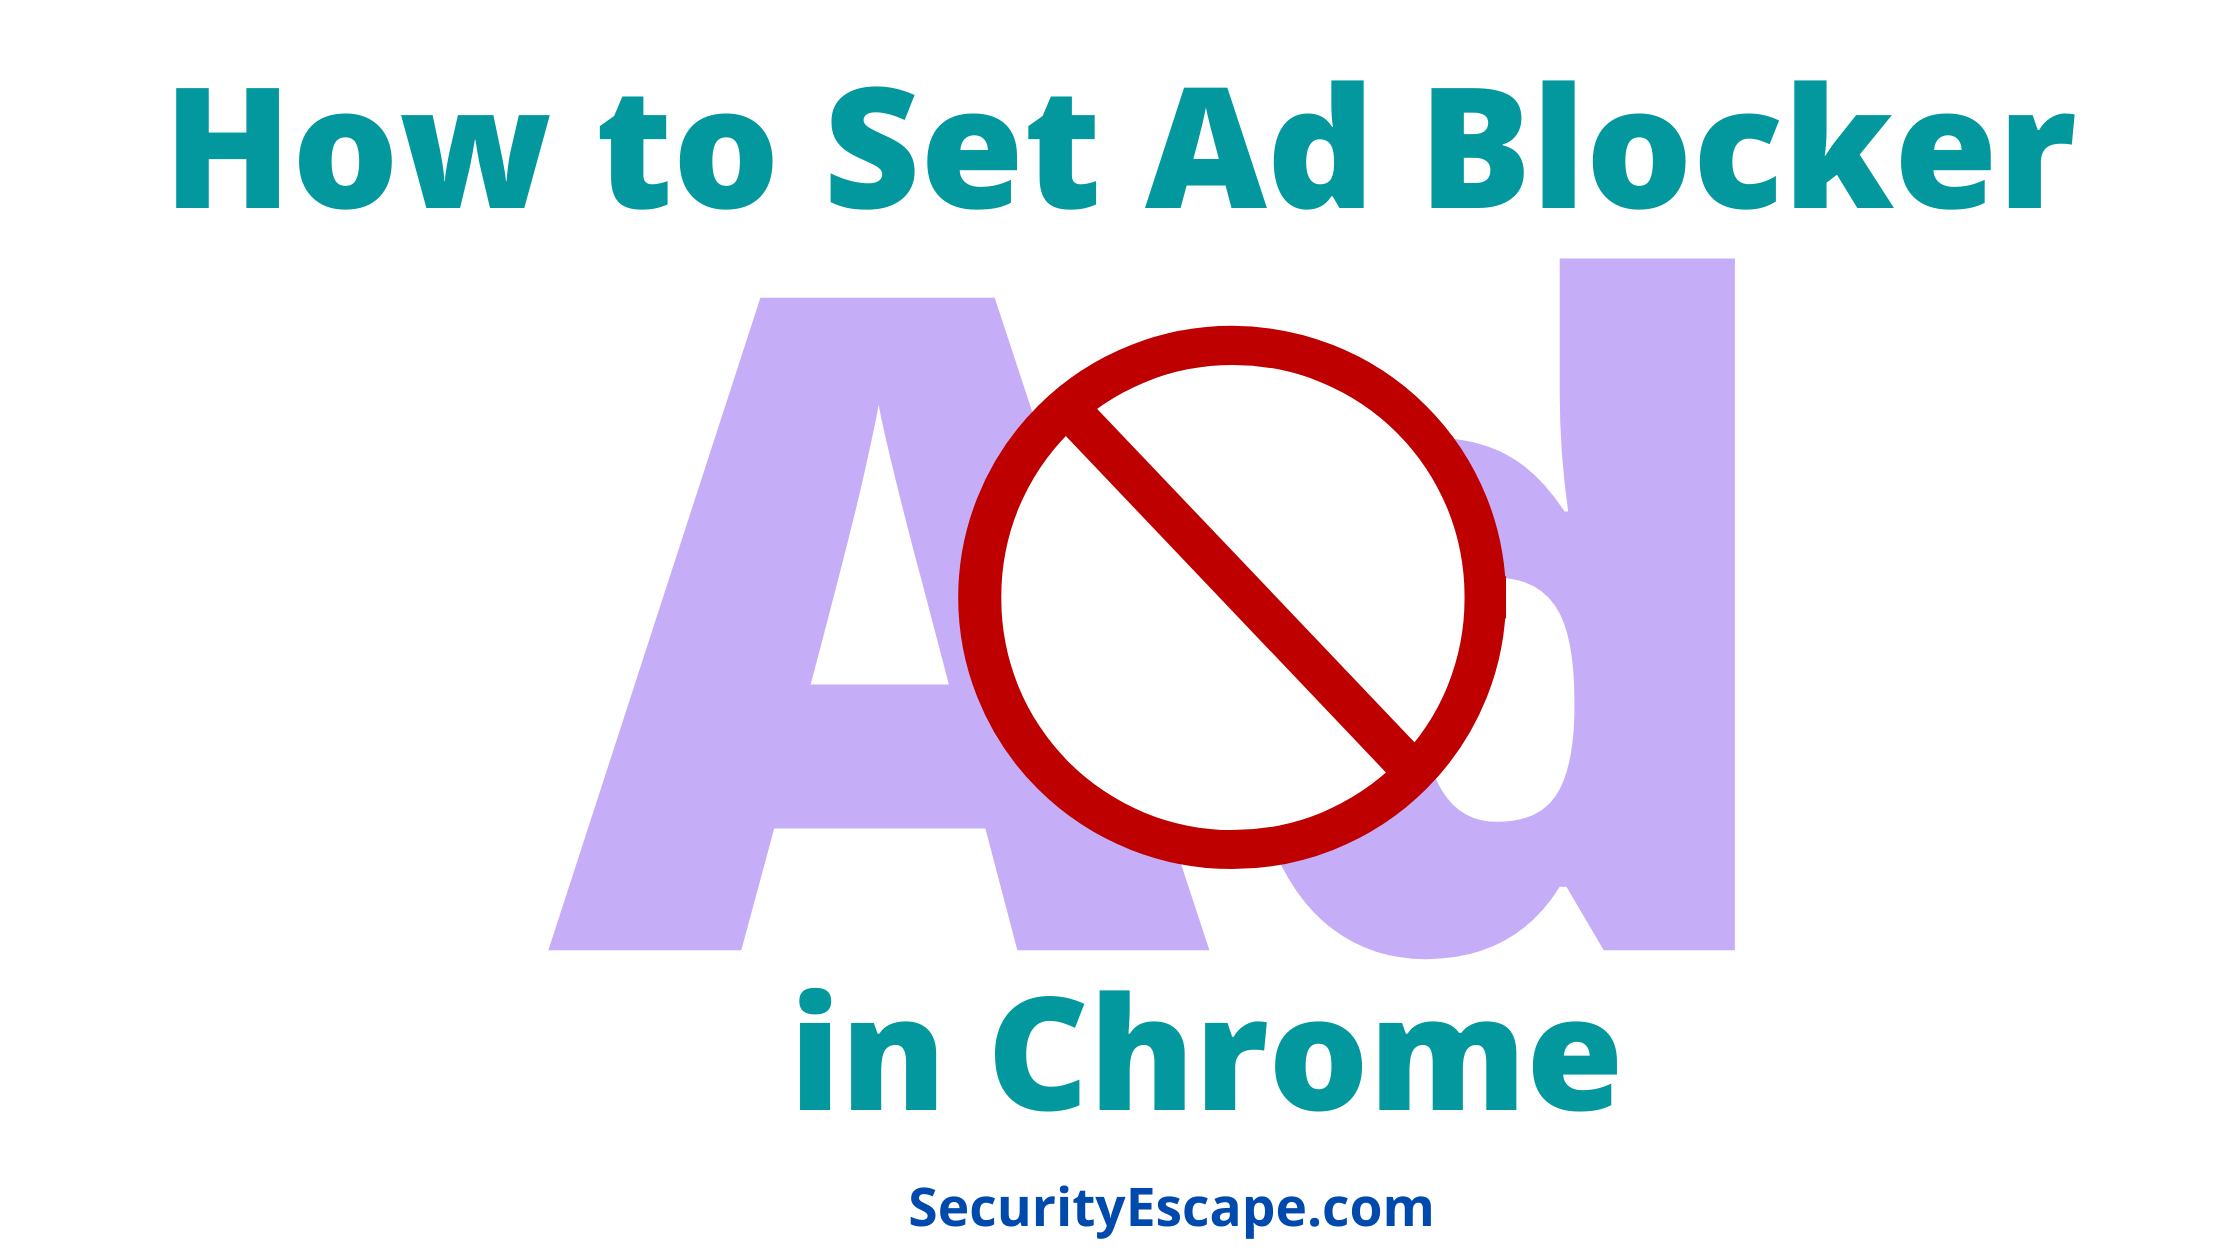 How to set Ad Blocker in Chrome